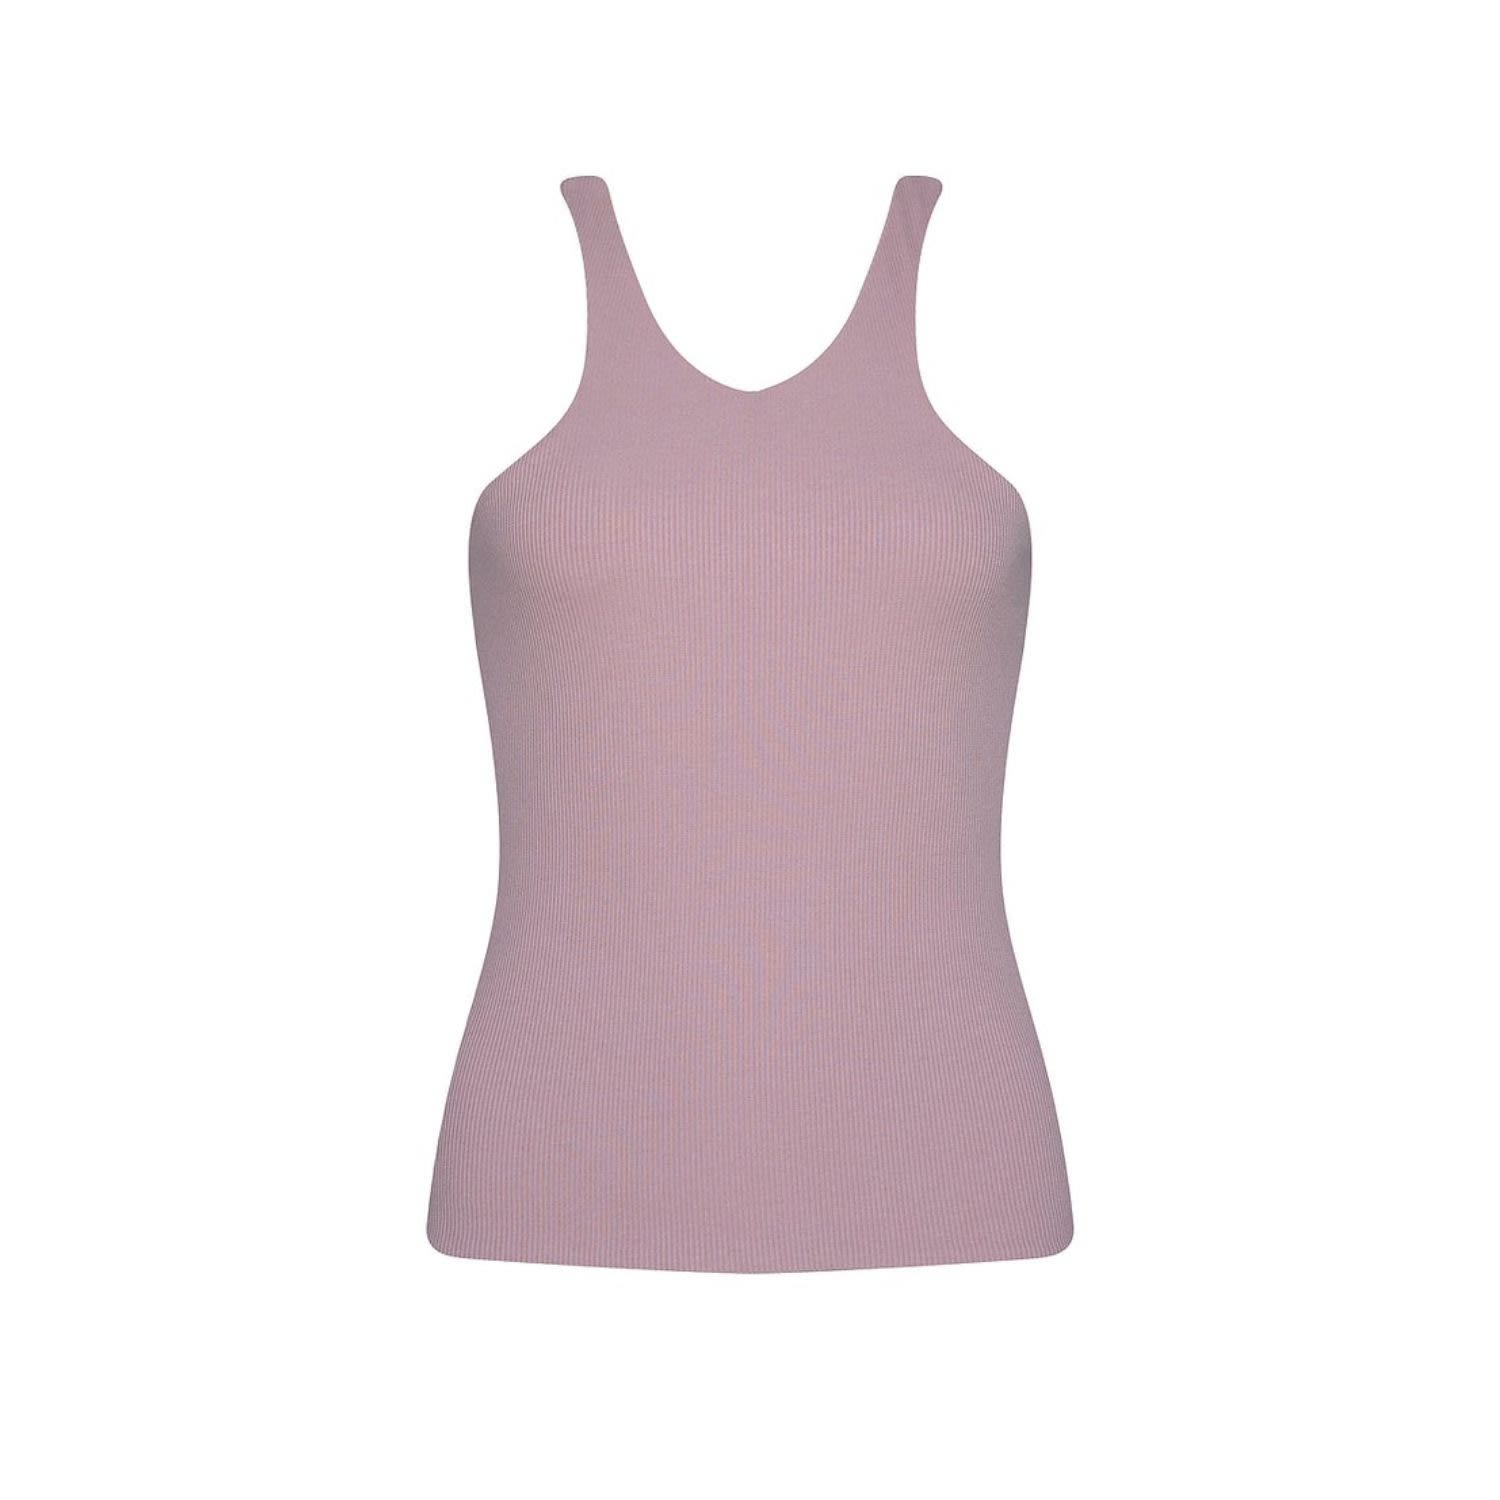 State Of Georgia Women's Pink / Purple The Lounger Rib Singlet Dusty Pink